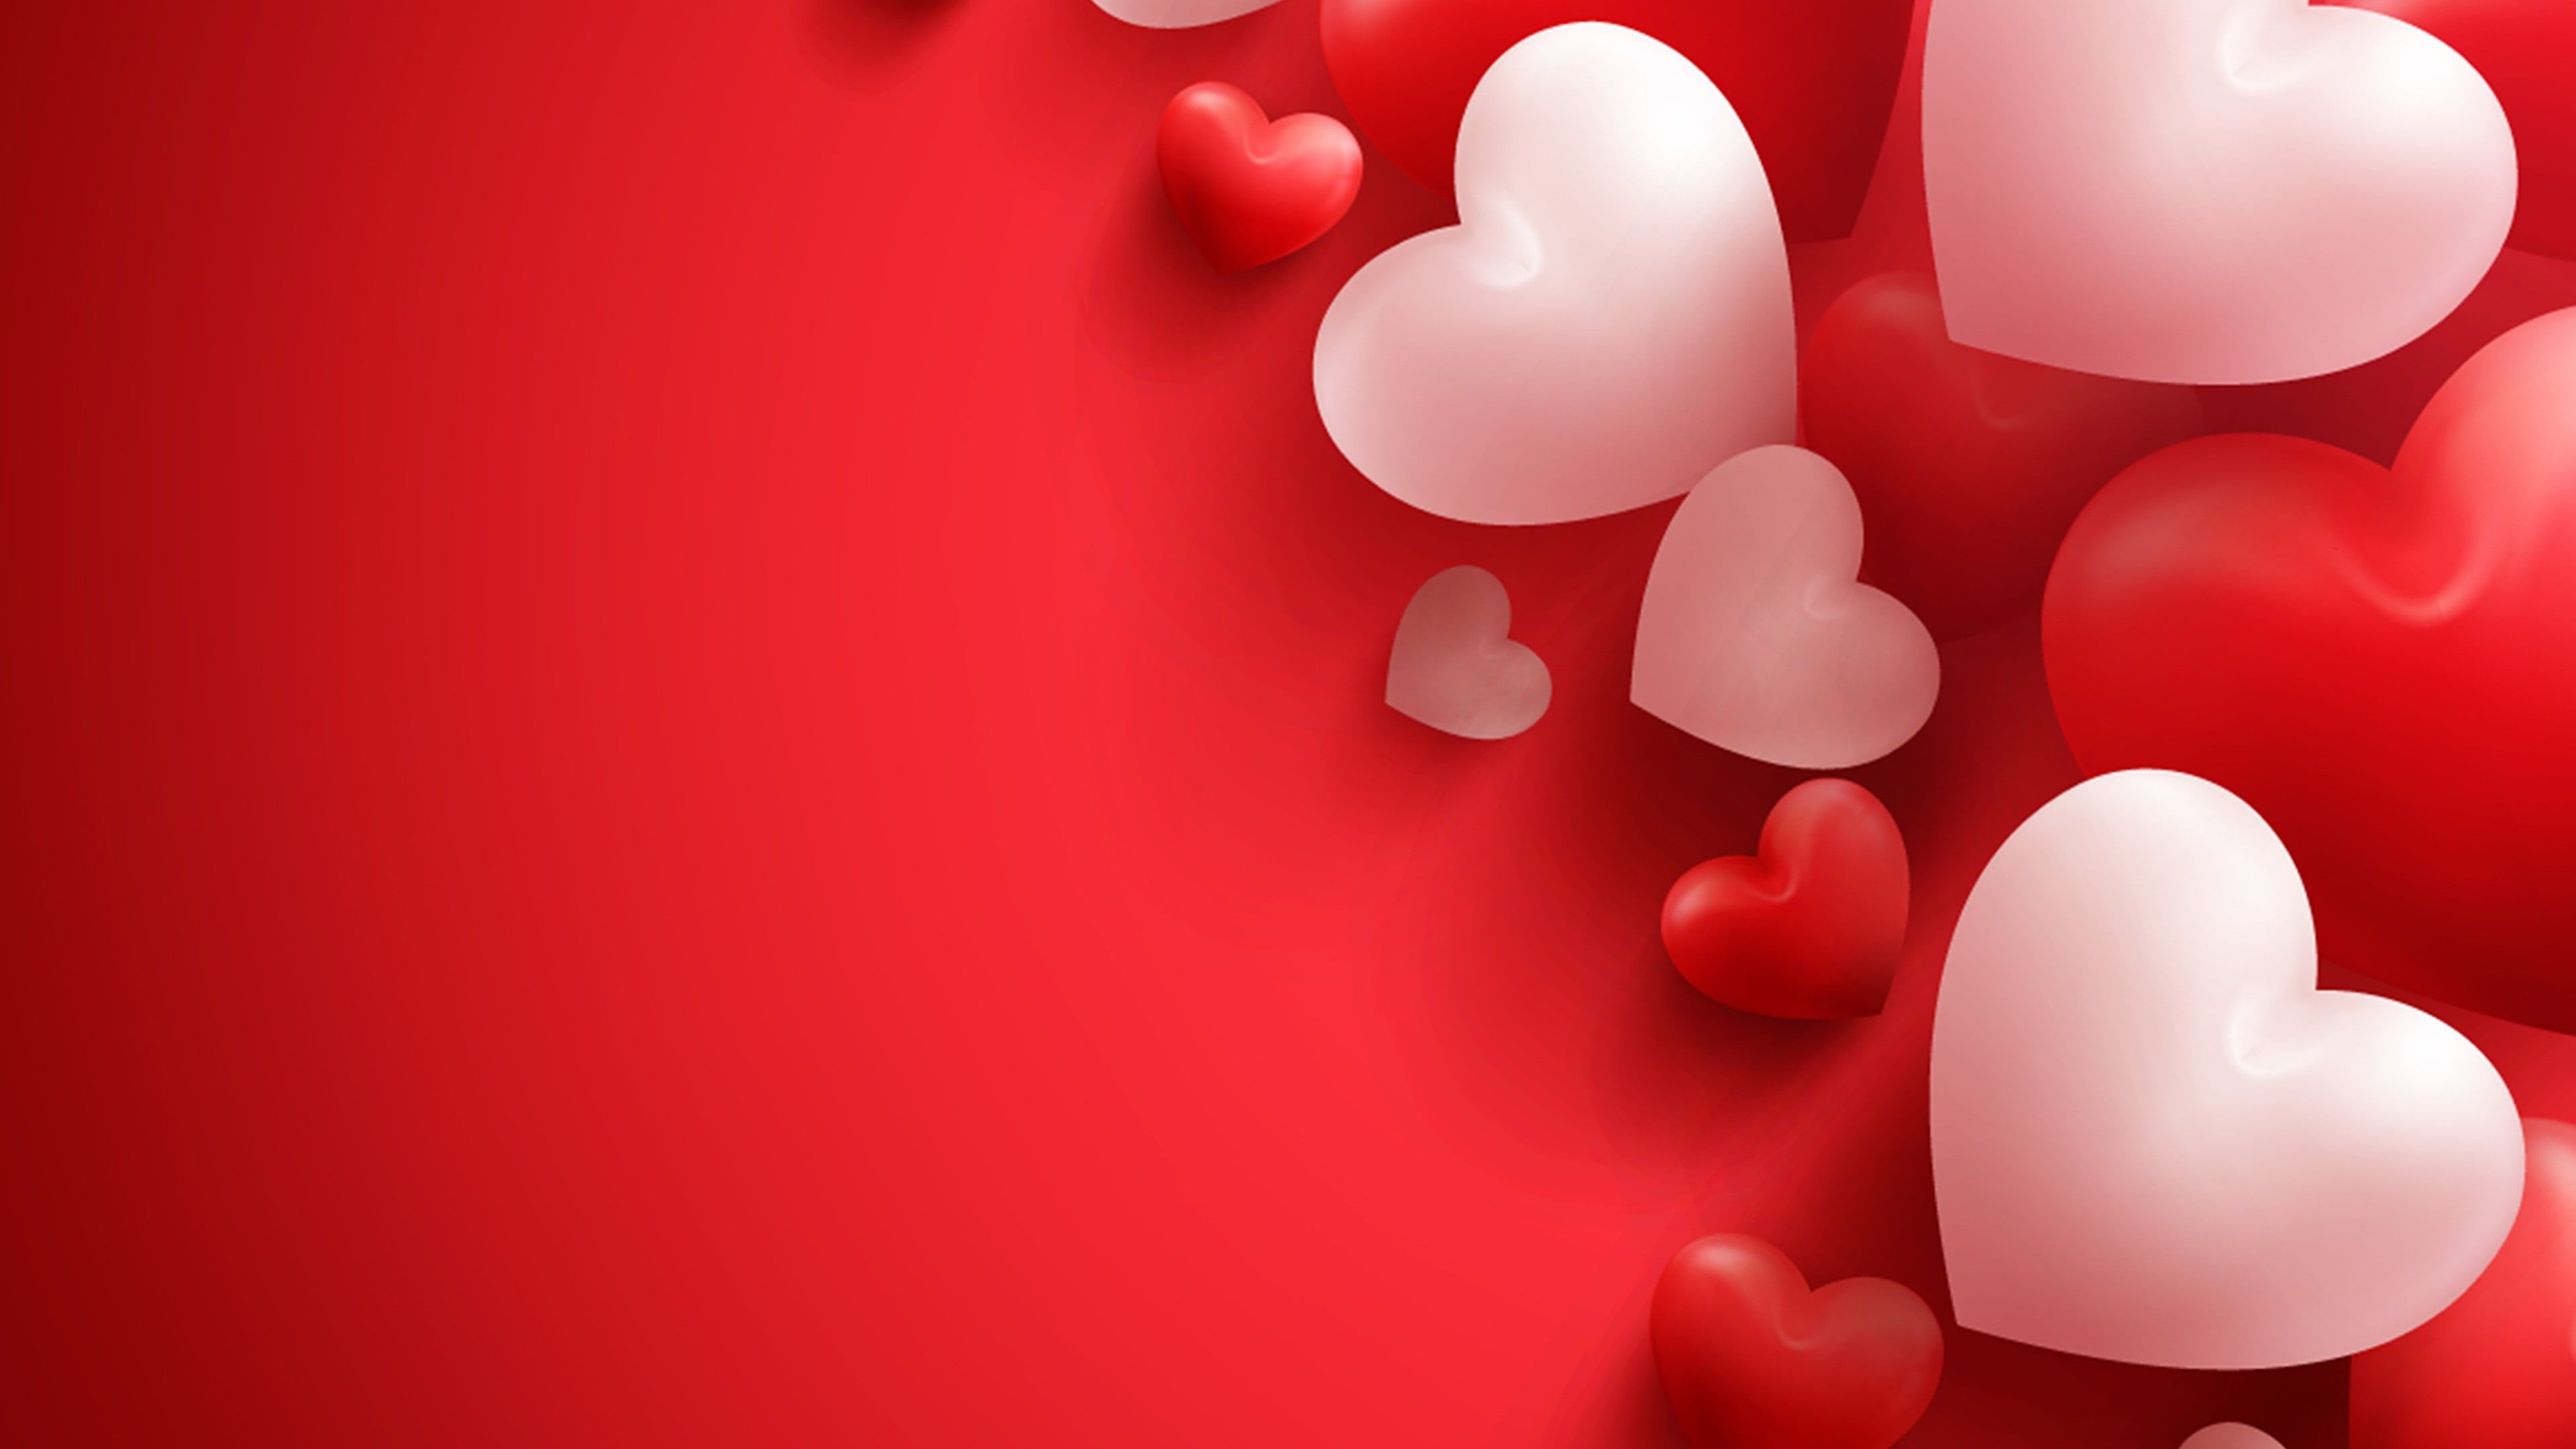 Red Love Heart Wallpapers